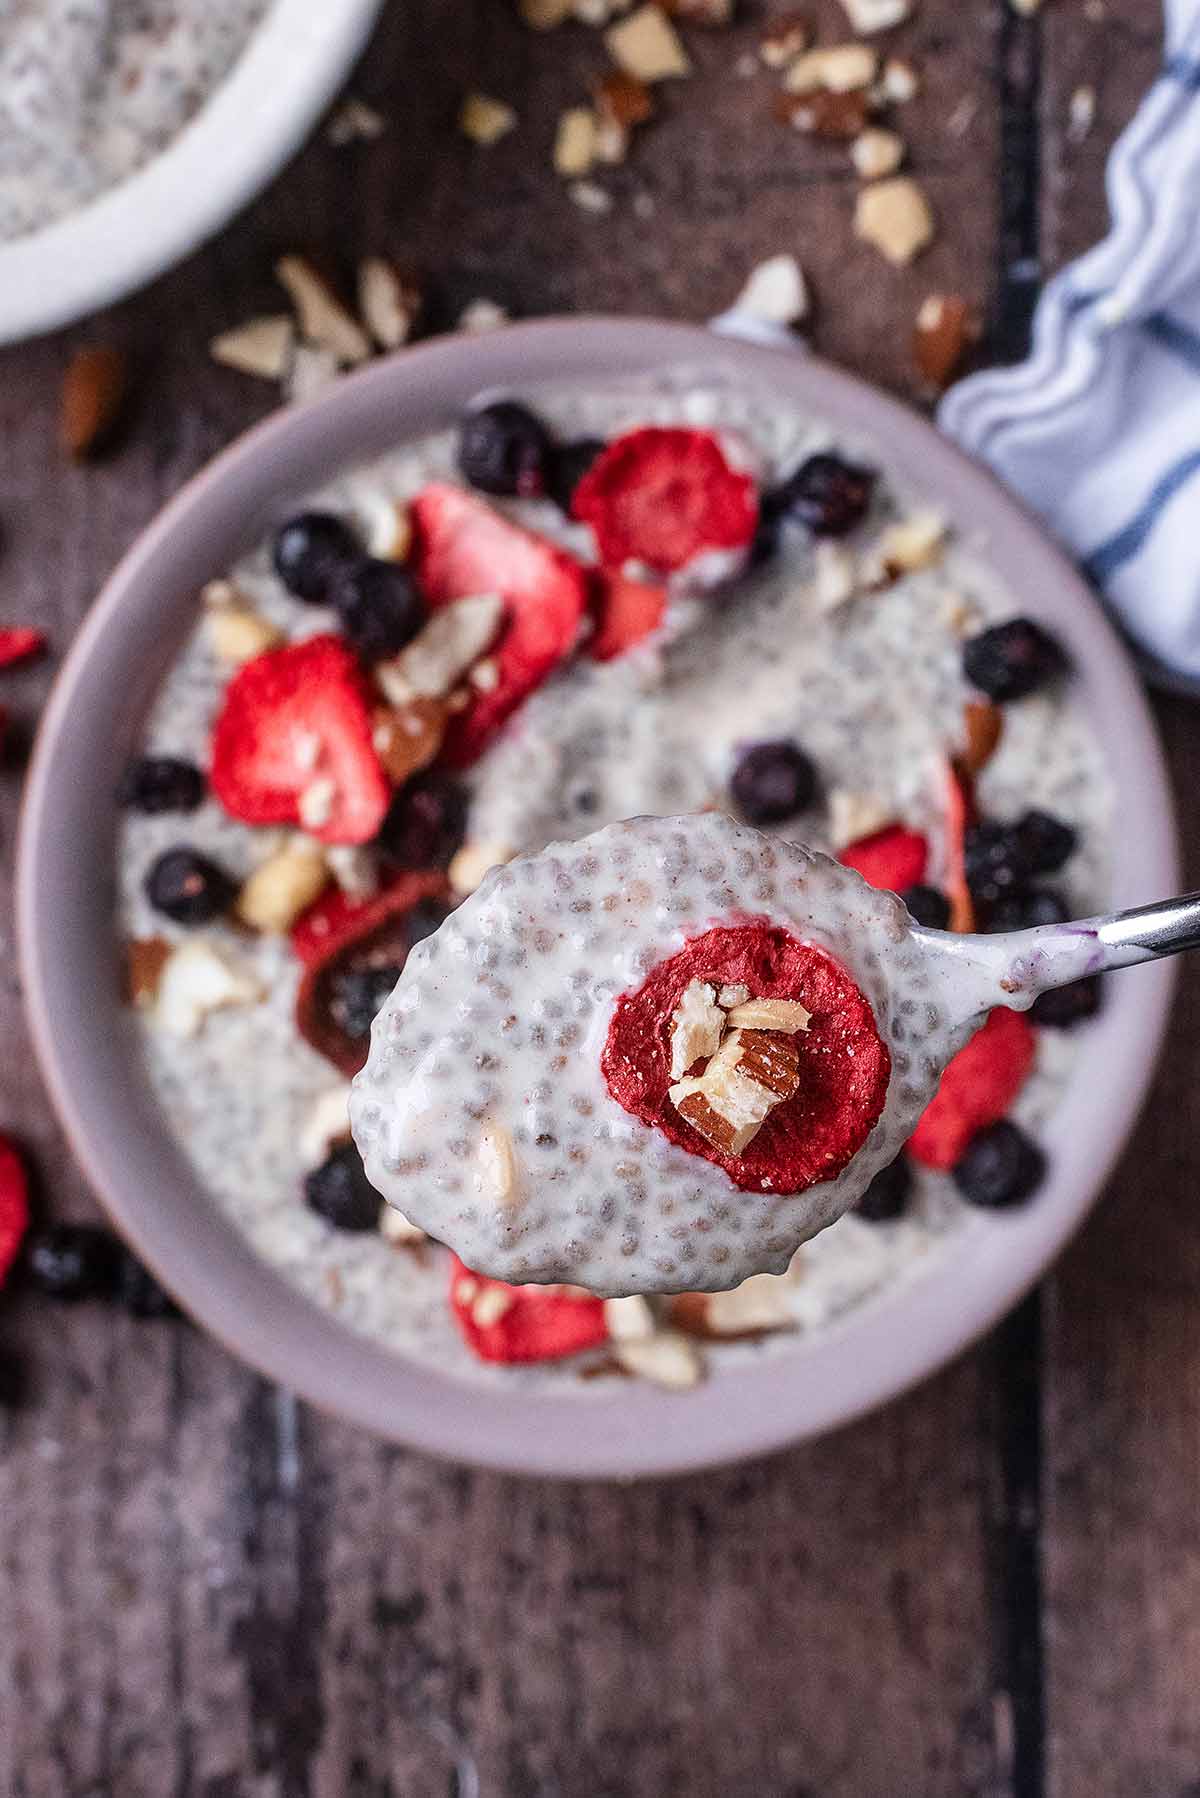 A spoon lifting some chia pudding, strawberry slice and crushed almond from a bowl.